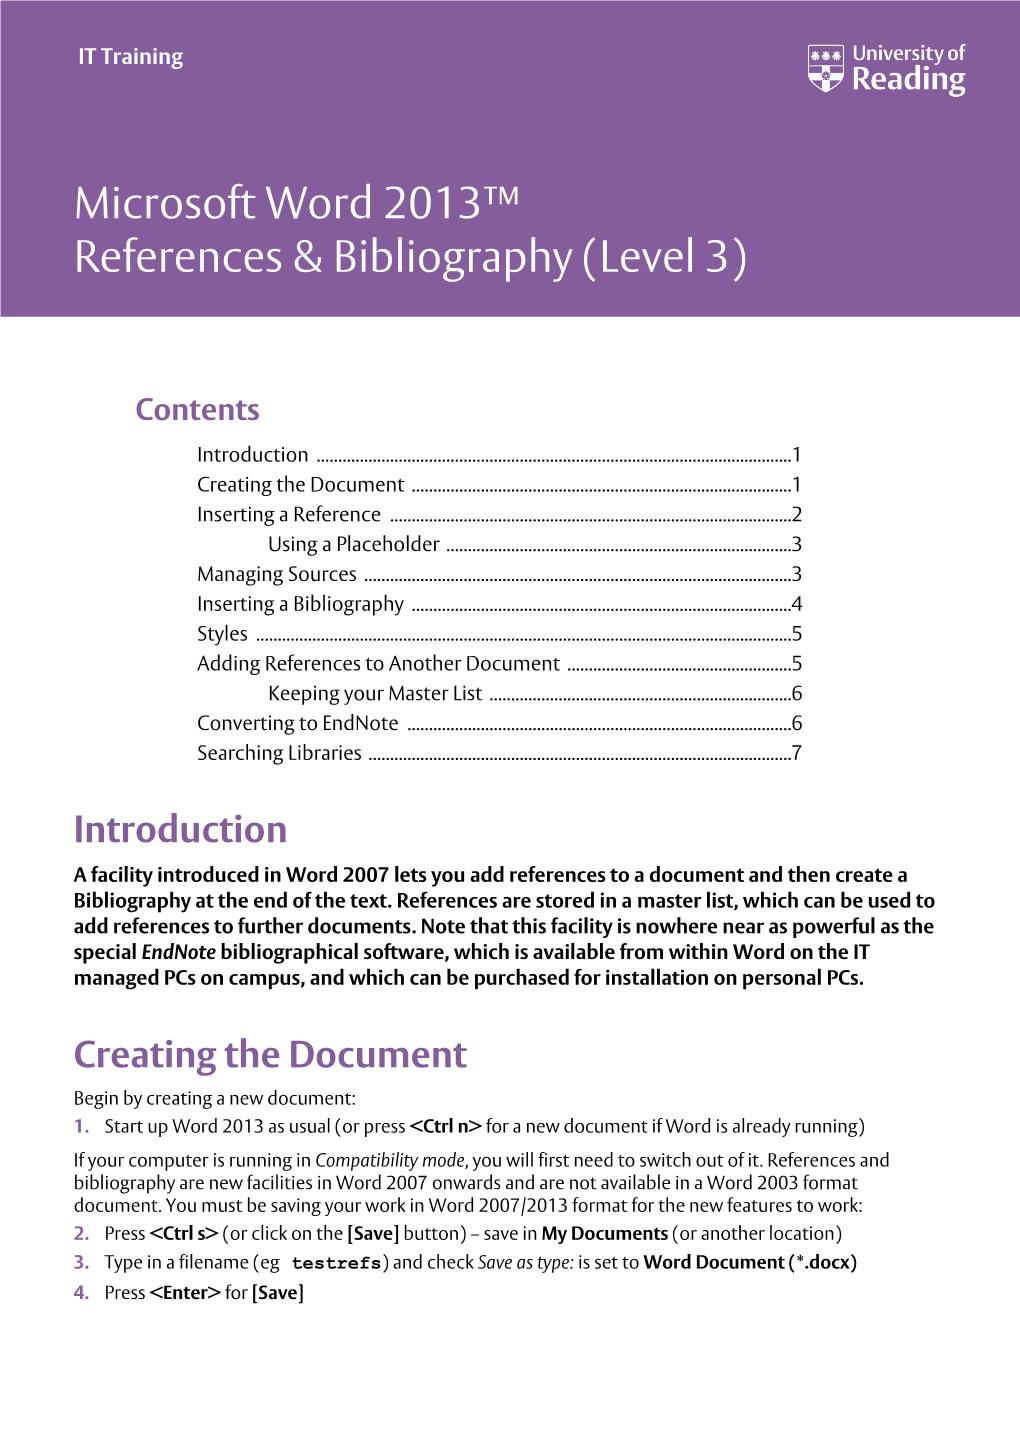 Microsoft Word 2013 References & Bibliography